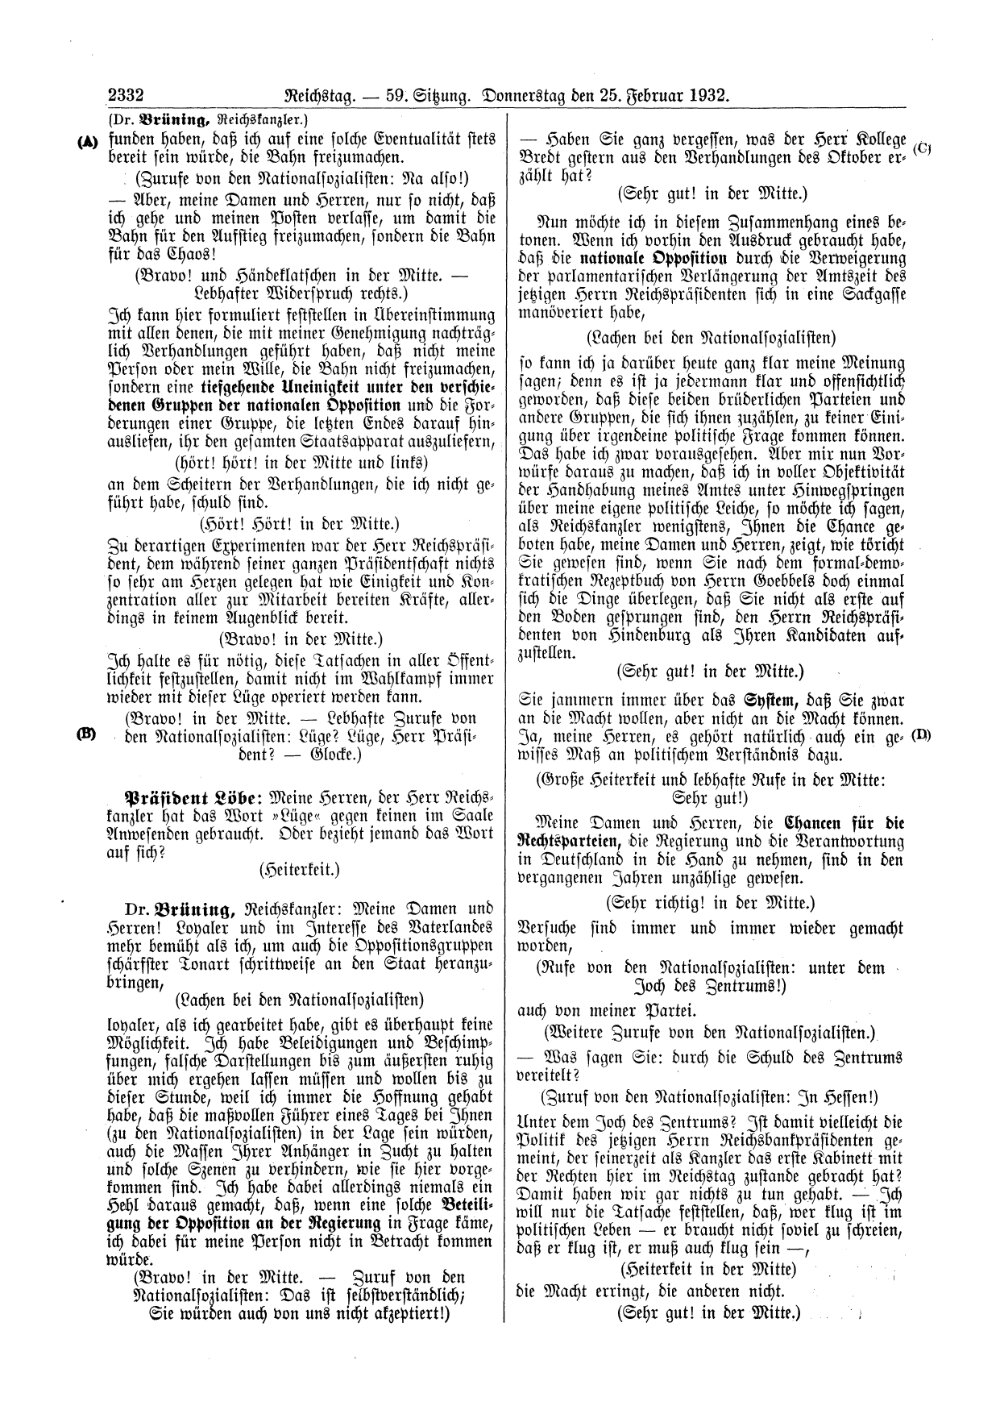 Scan of page 2332